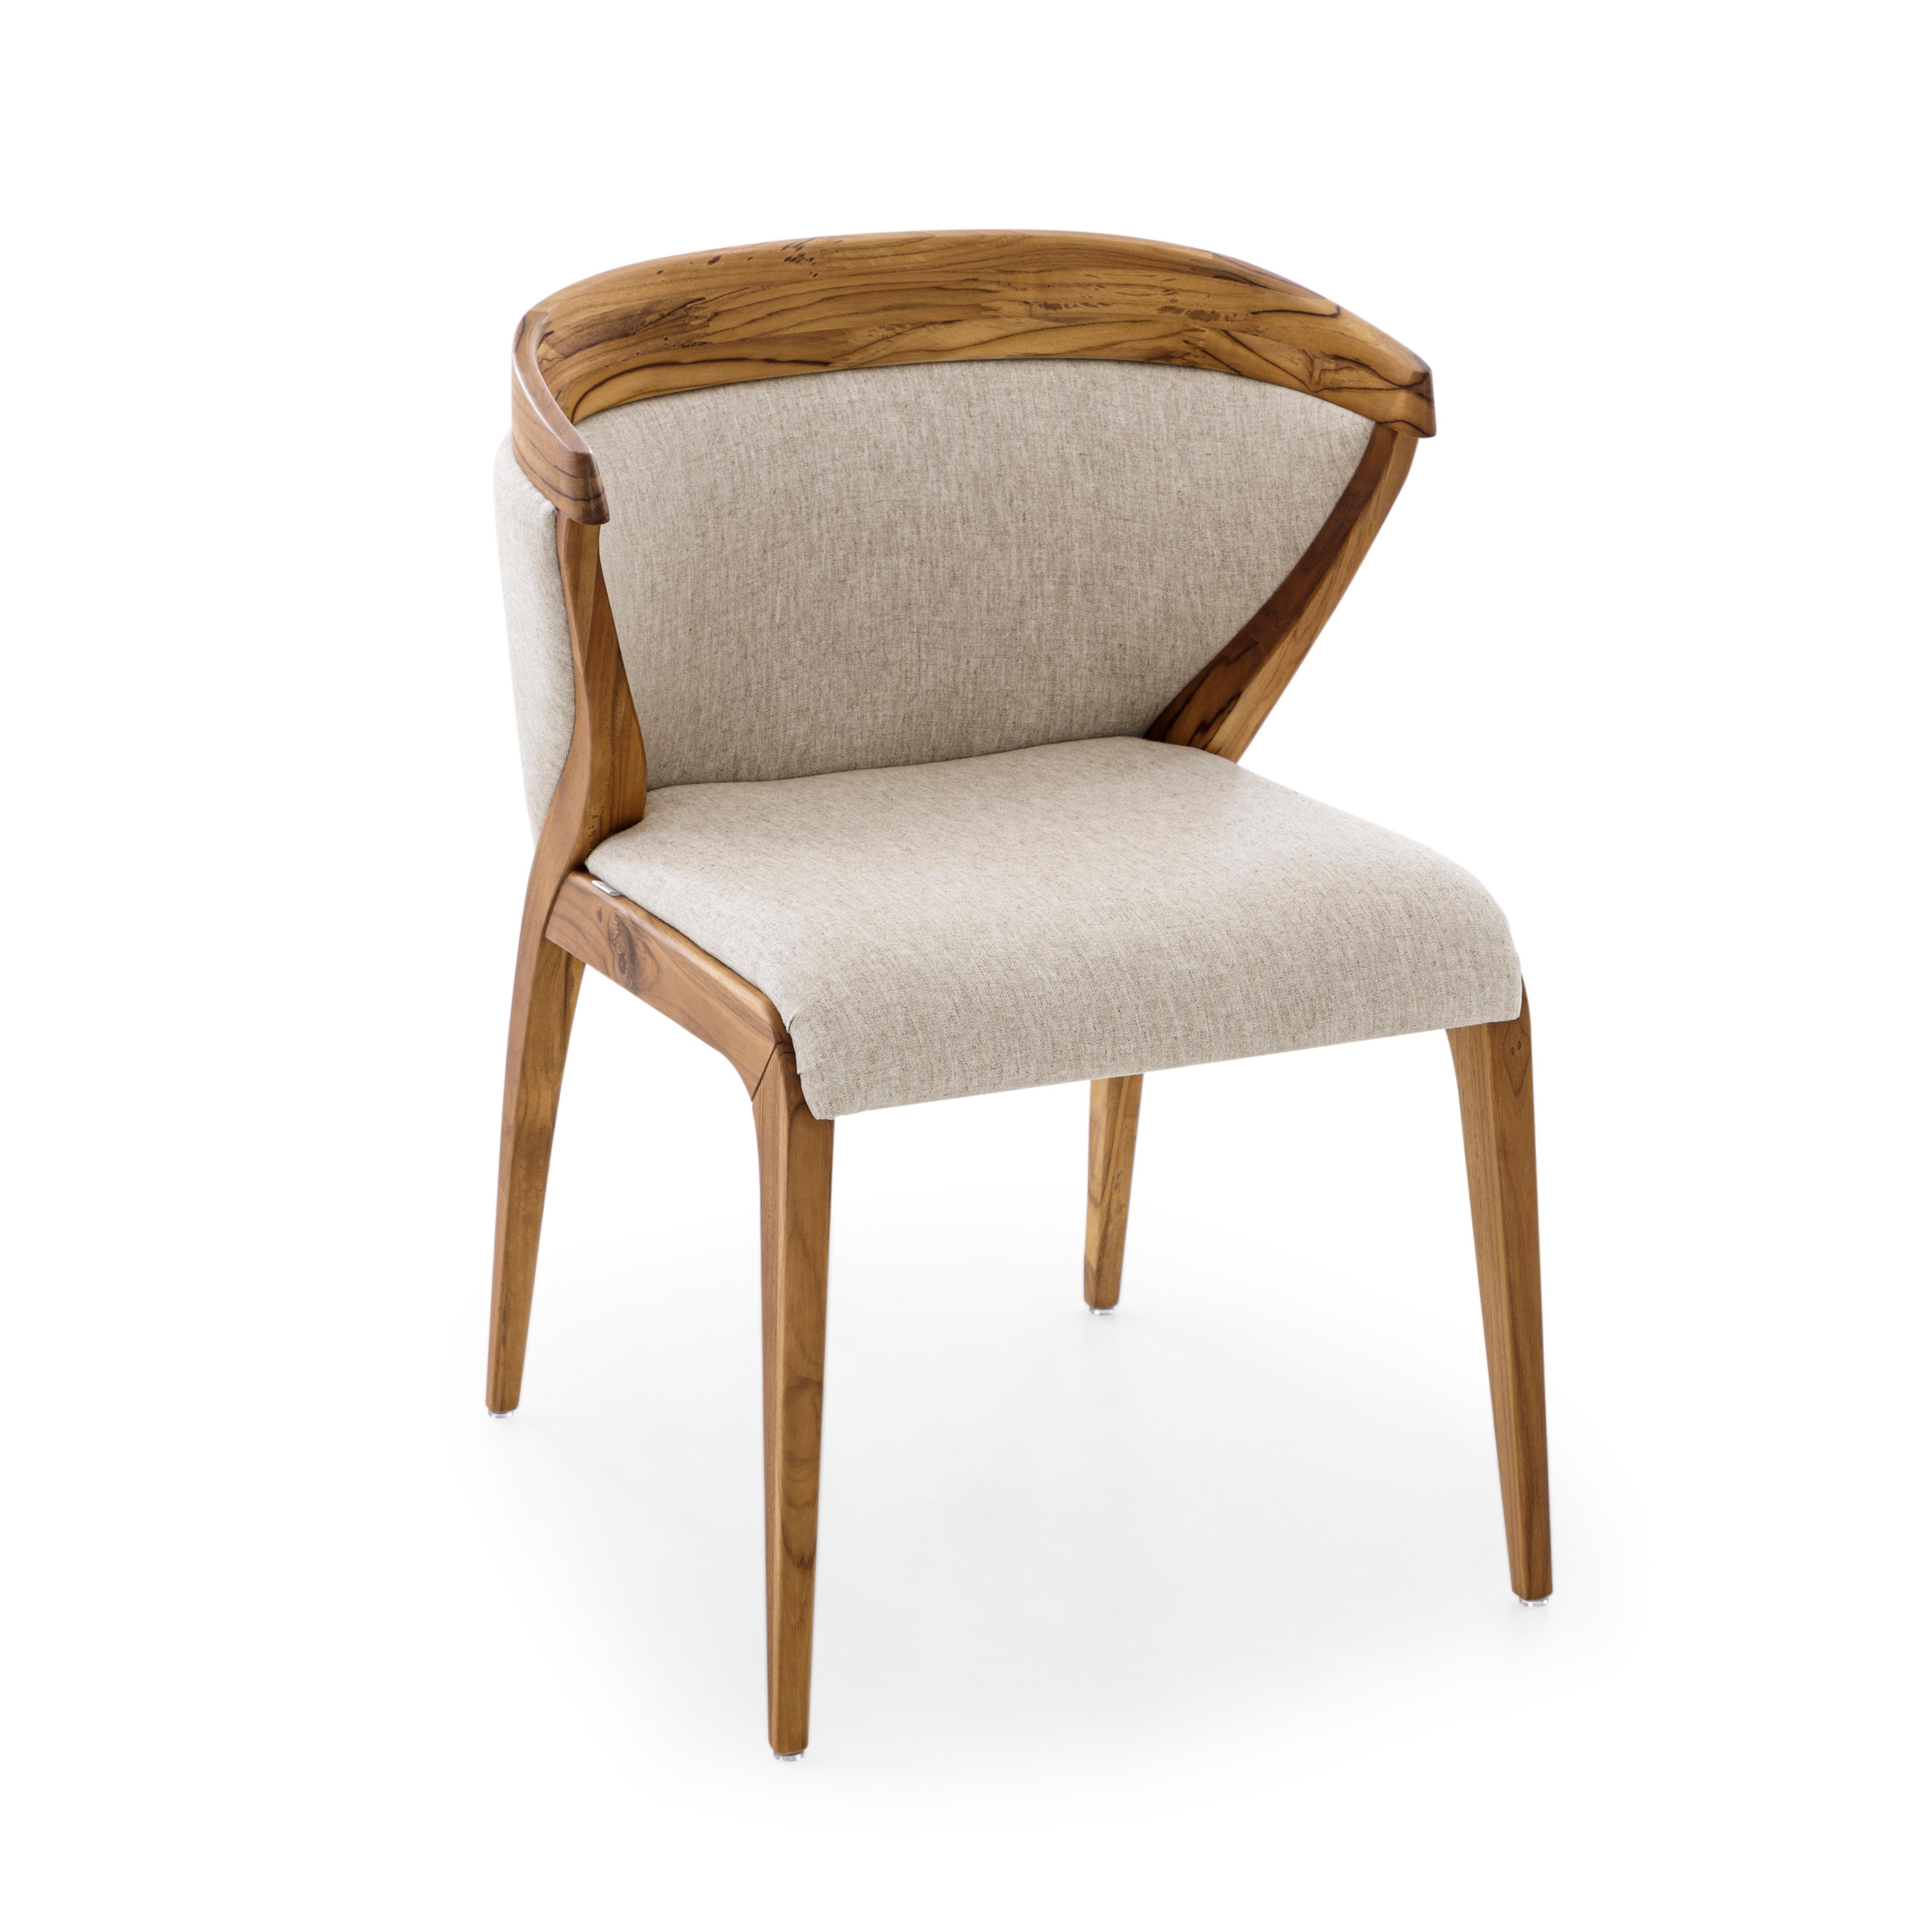 Mat Dining Chair in Teak Wood Finish with Upholstered Back and Ivory Fabric Seat In New Condition For Sale In Miami, FL